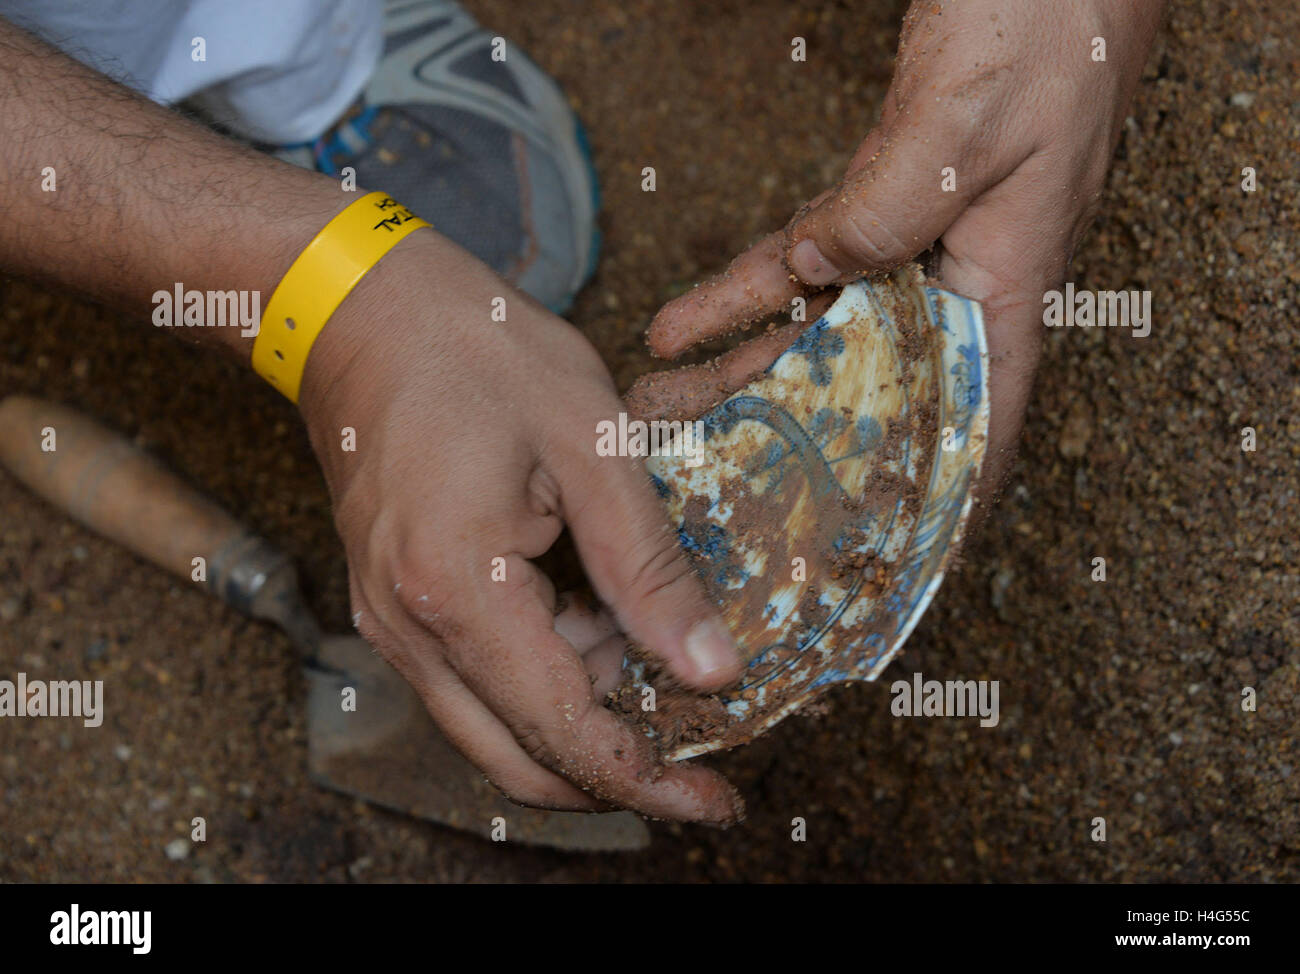 (161015) -- ACAPULCO (MEXICO), Oct. 15, 2016 (Xinhua) -- Photo taken on Oct. 5, 2016, shows an archaeologist working on an antique Chinese porcelain fragment in the city of Acapulco, Mexico. A new archaeological find announced on Friday in Mexico attests to China's age-old vocation as an exporting powerhouse. Mexican archaeologists have uncovered thousands of fragments of a 400-year-old shipment of Chinese 'export-quality porcelain' that was long buried in the Pacific Coast port of Acapulco. (Xinhua/Meliton Tapia/INAH) (lr) Stock Photo